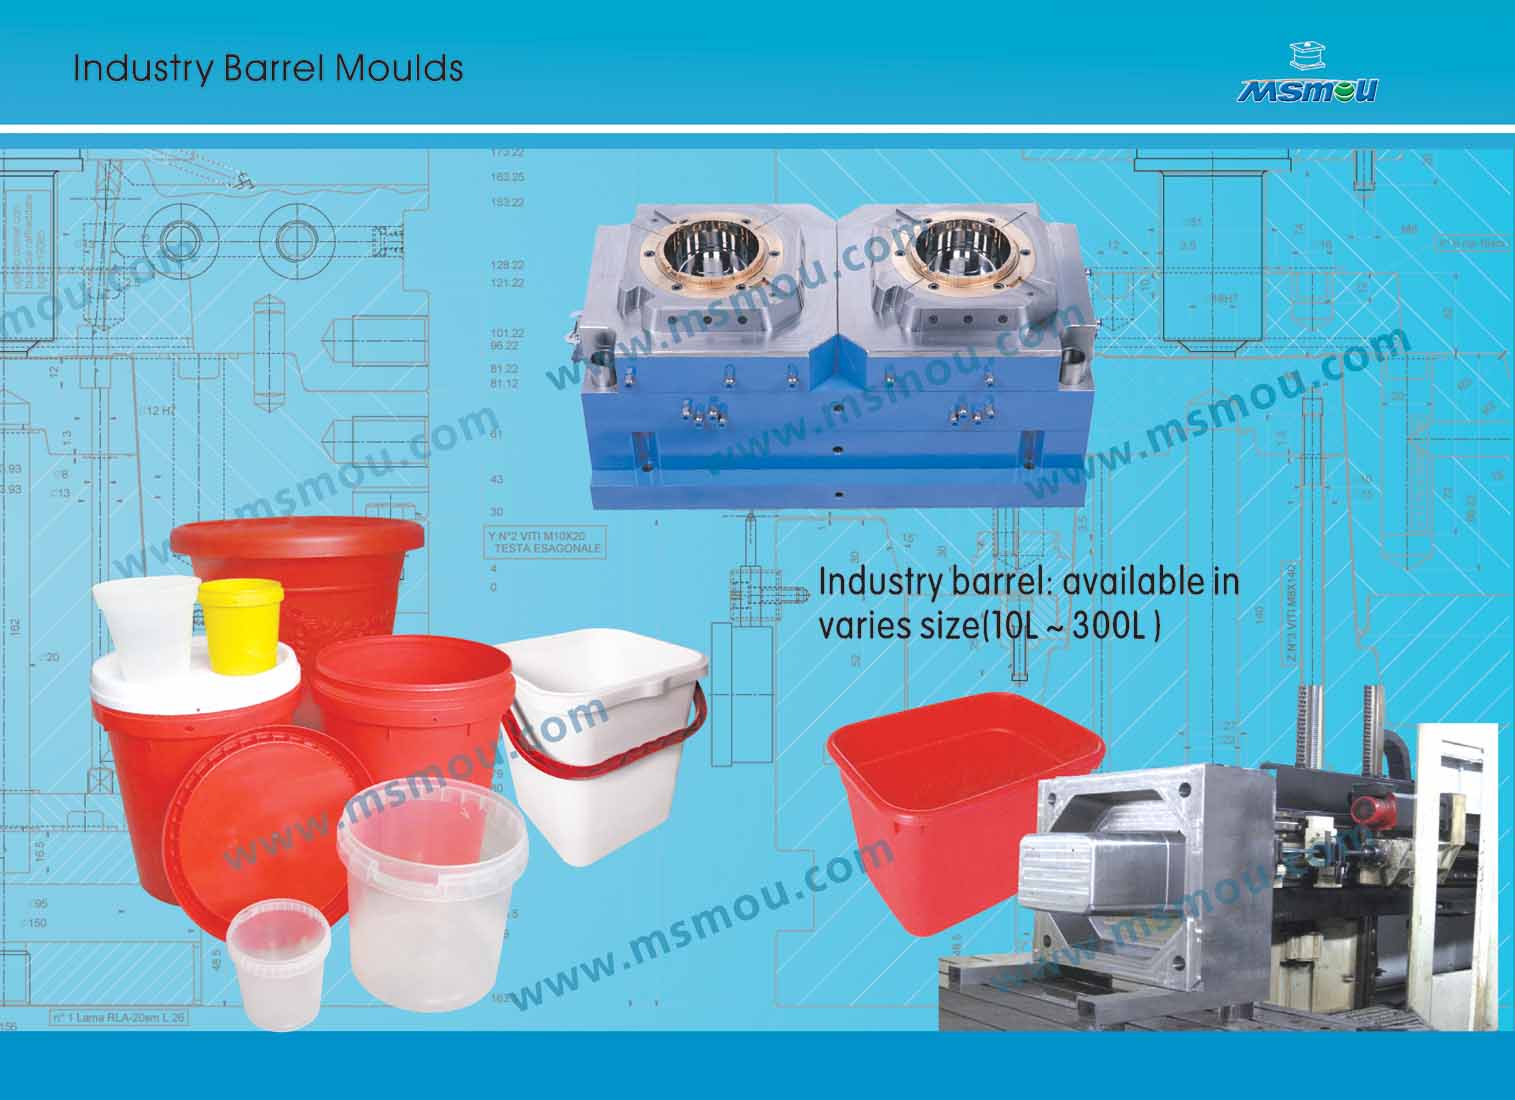 Mouse Mold Series